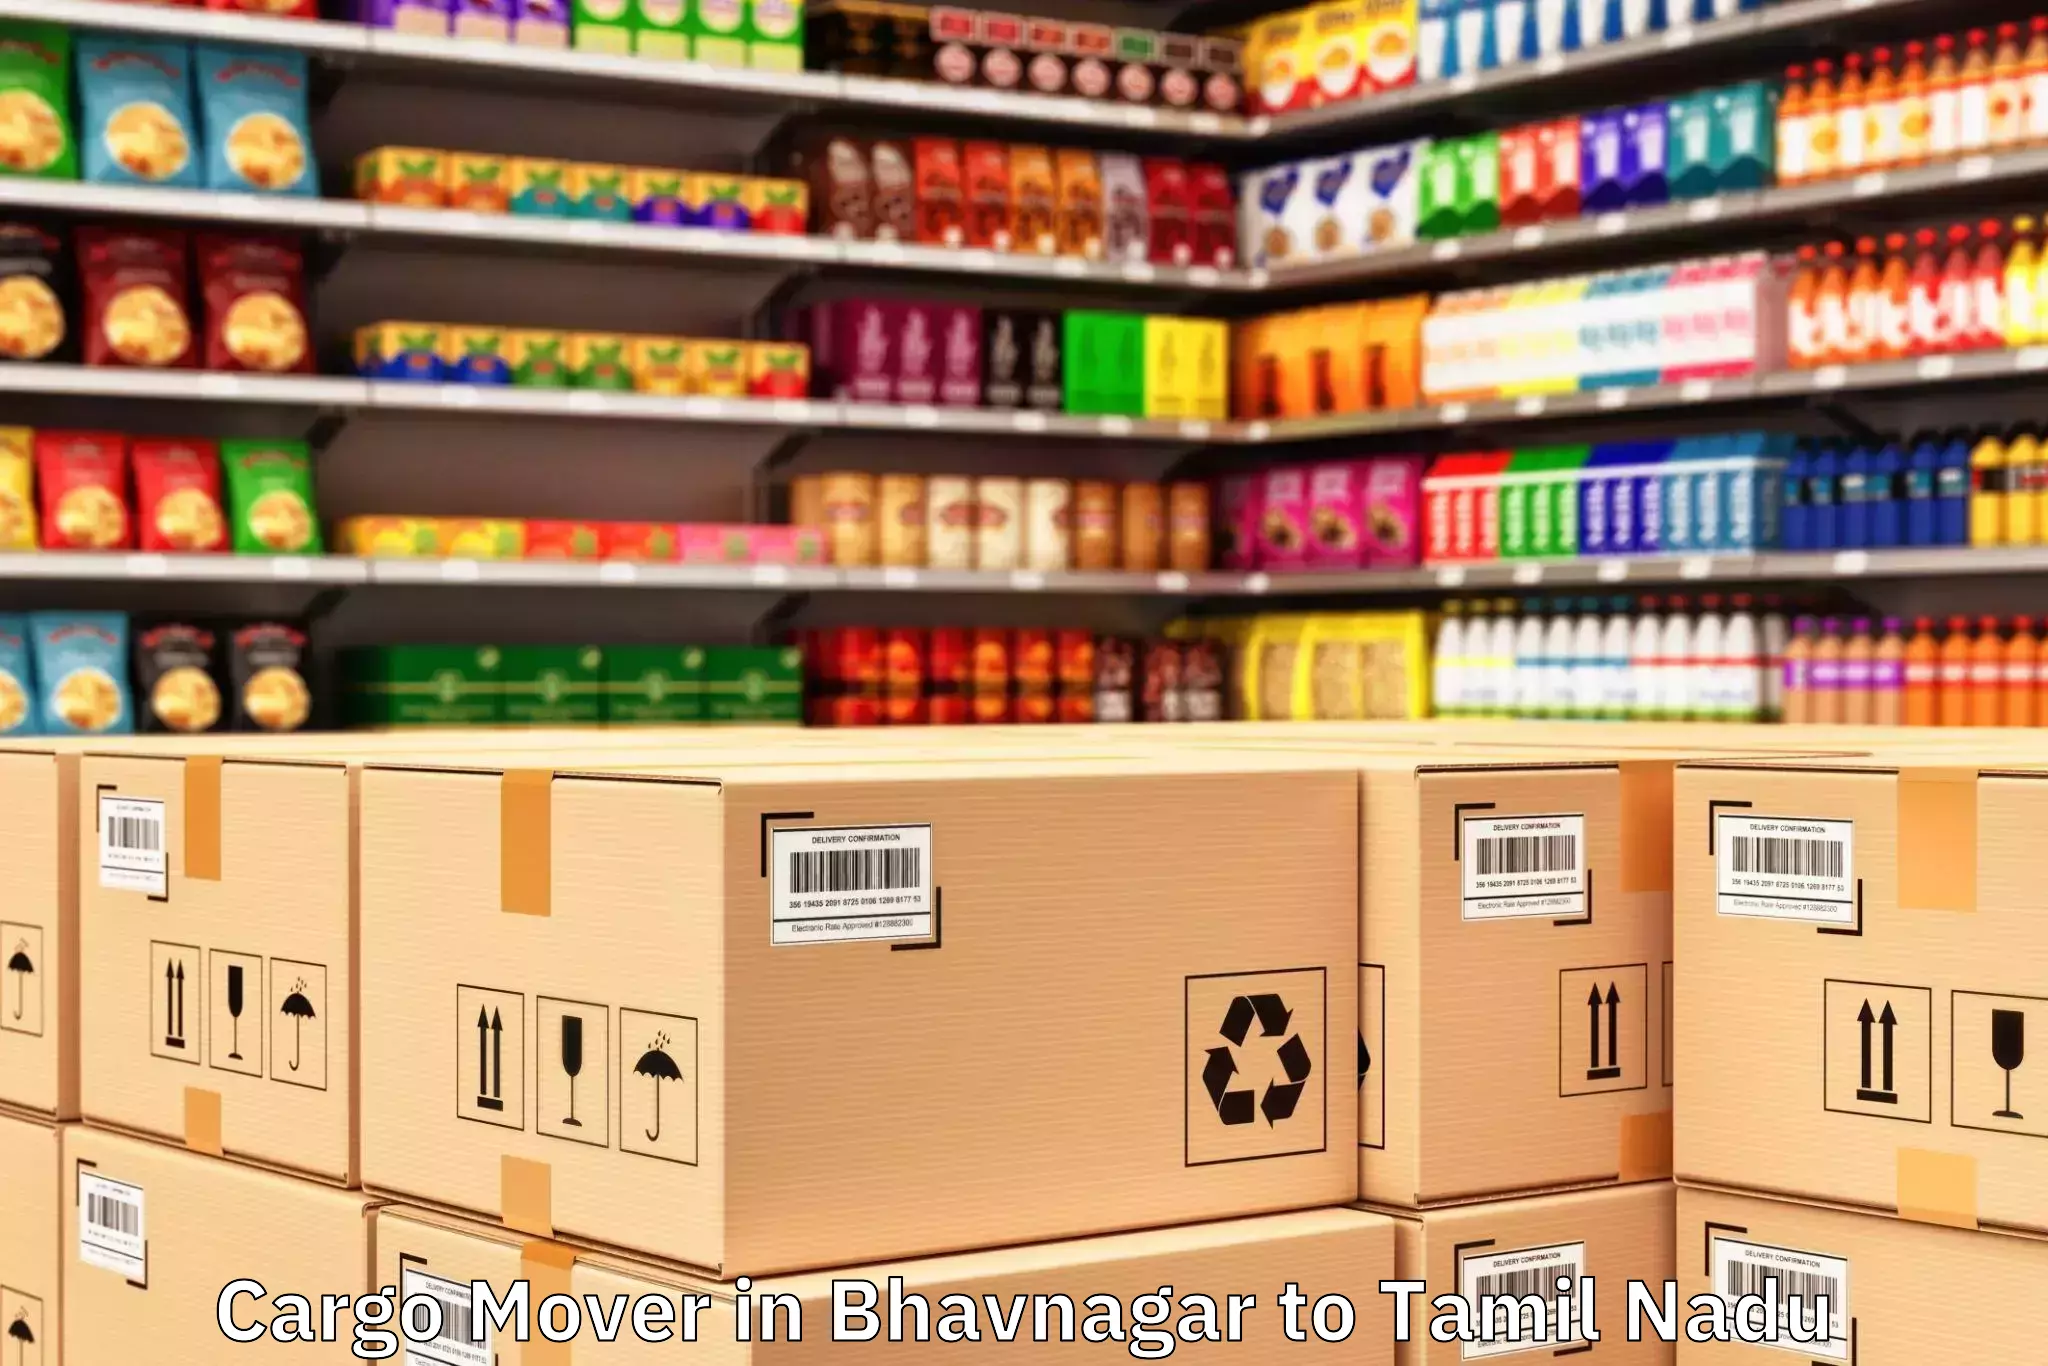 Top Bhavnagar to Shanmugha Arts Science Technology And Research Academy Thanjavur Cargo Mover Available